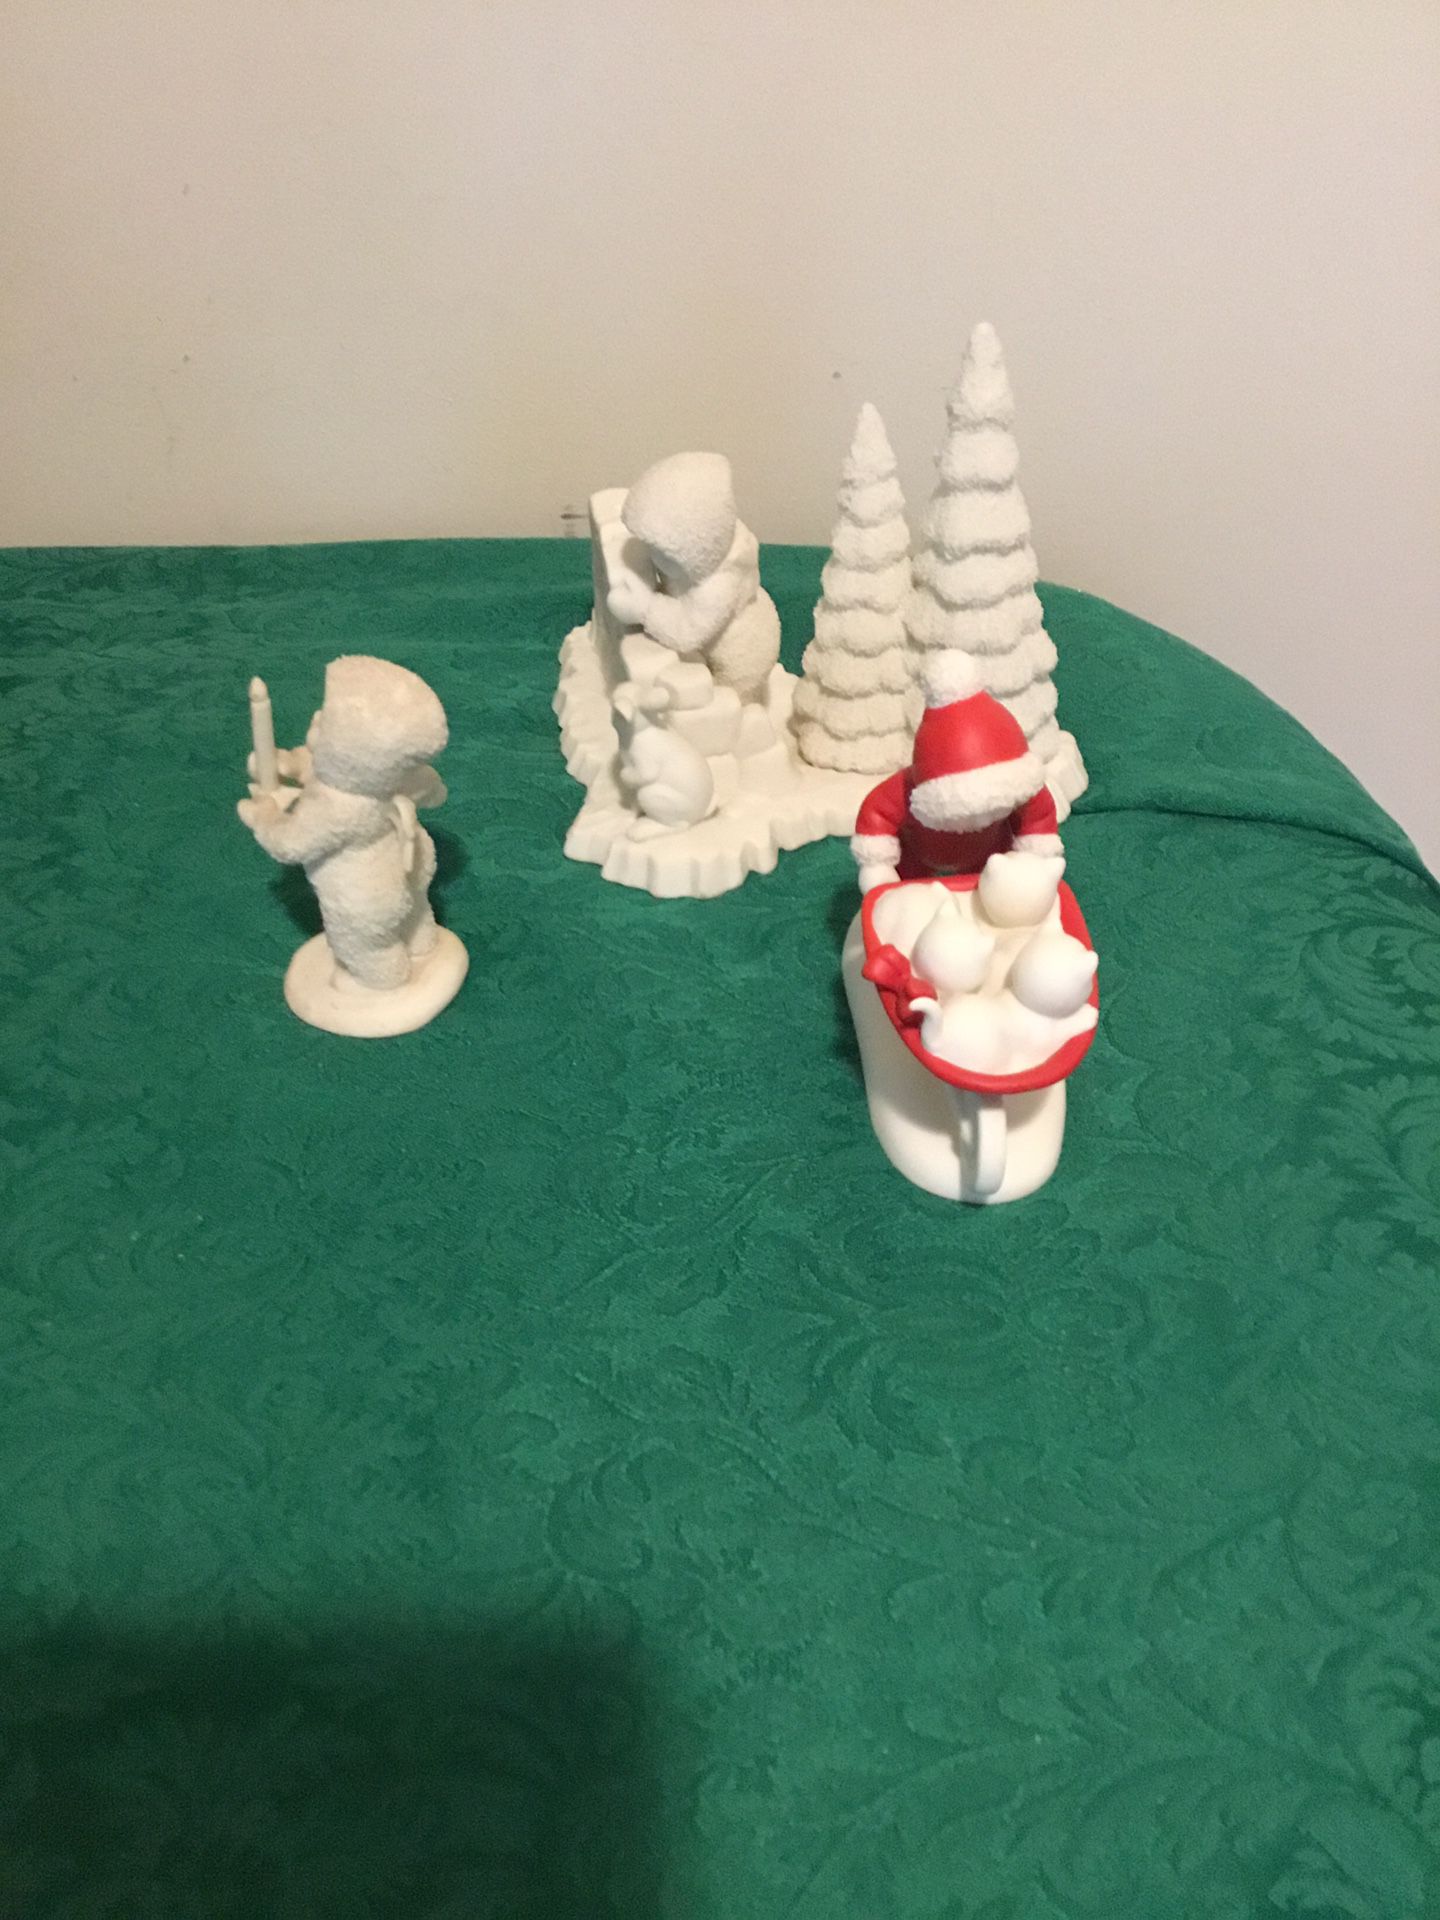 Three Dept 56 Snow Babies Kittens, Candle, Bunny Wall With Sign